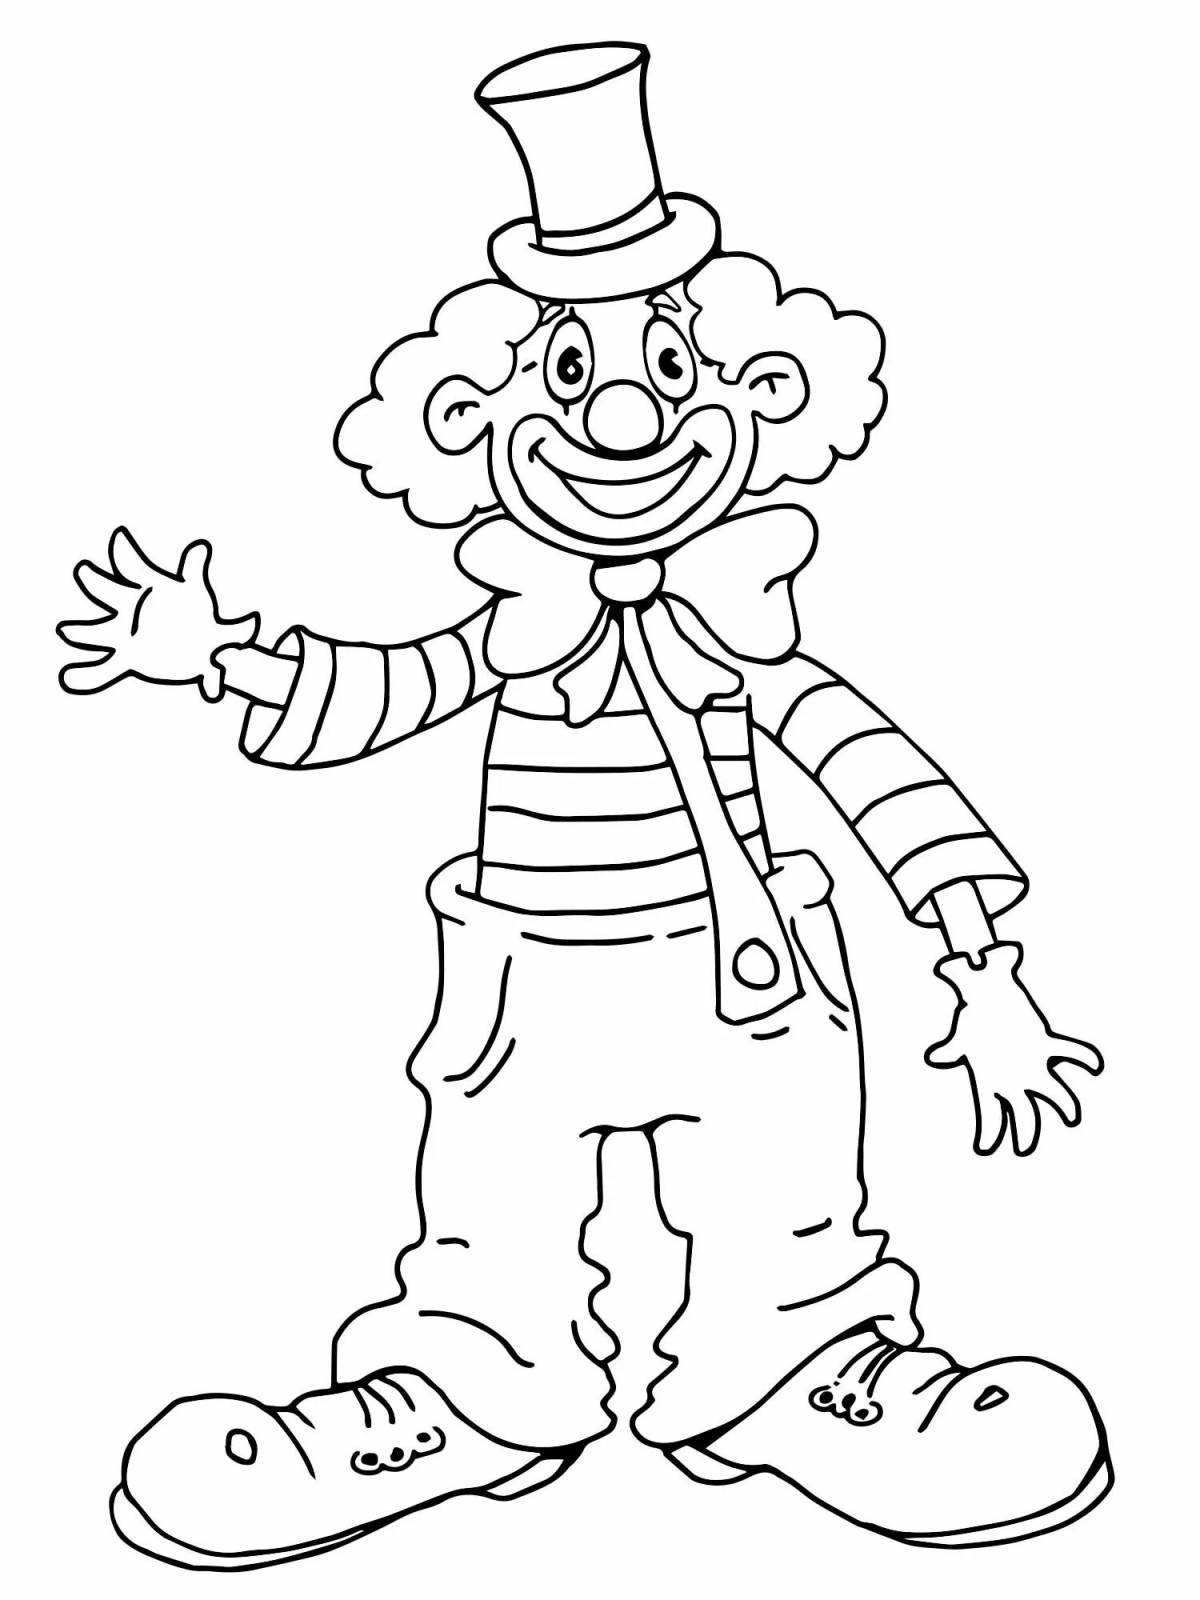 Shiny clown coloring book for kids